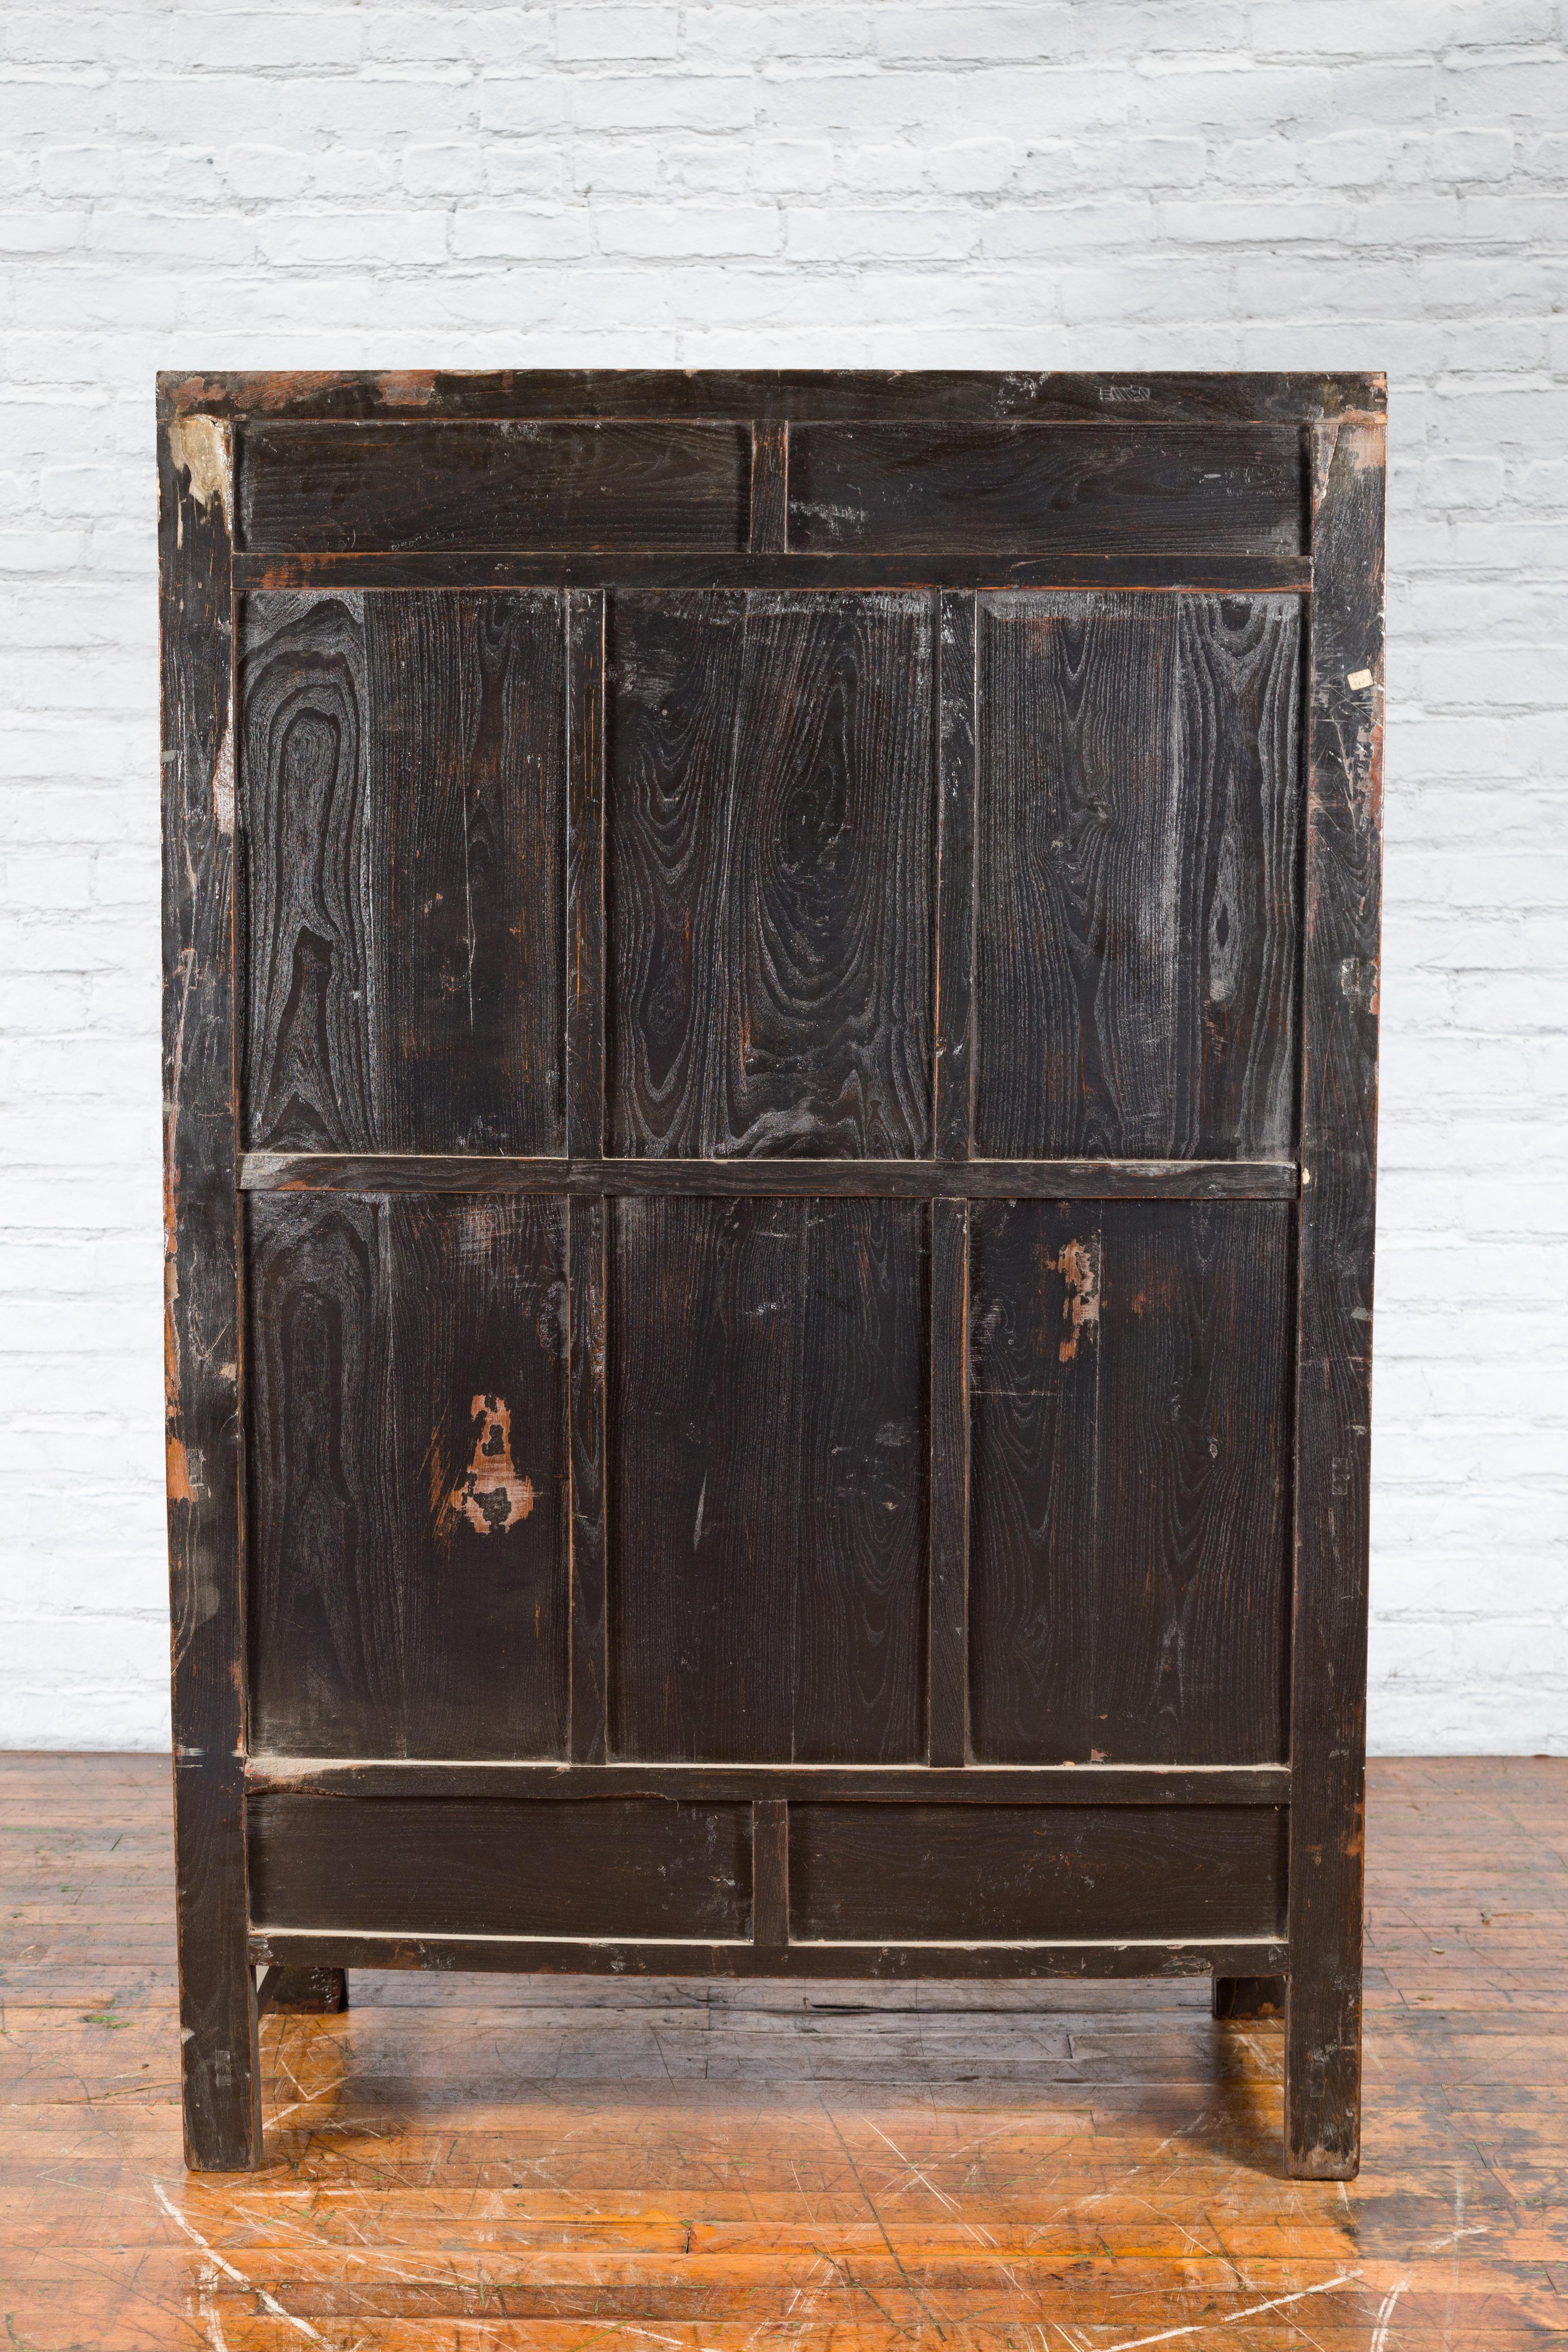 Chinese Qing Dynasty 19th Century Cabinet with Original Black Lacquer Finish For Sale 11